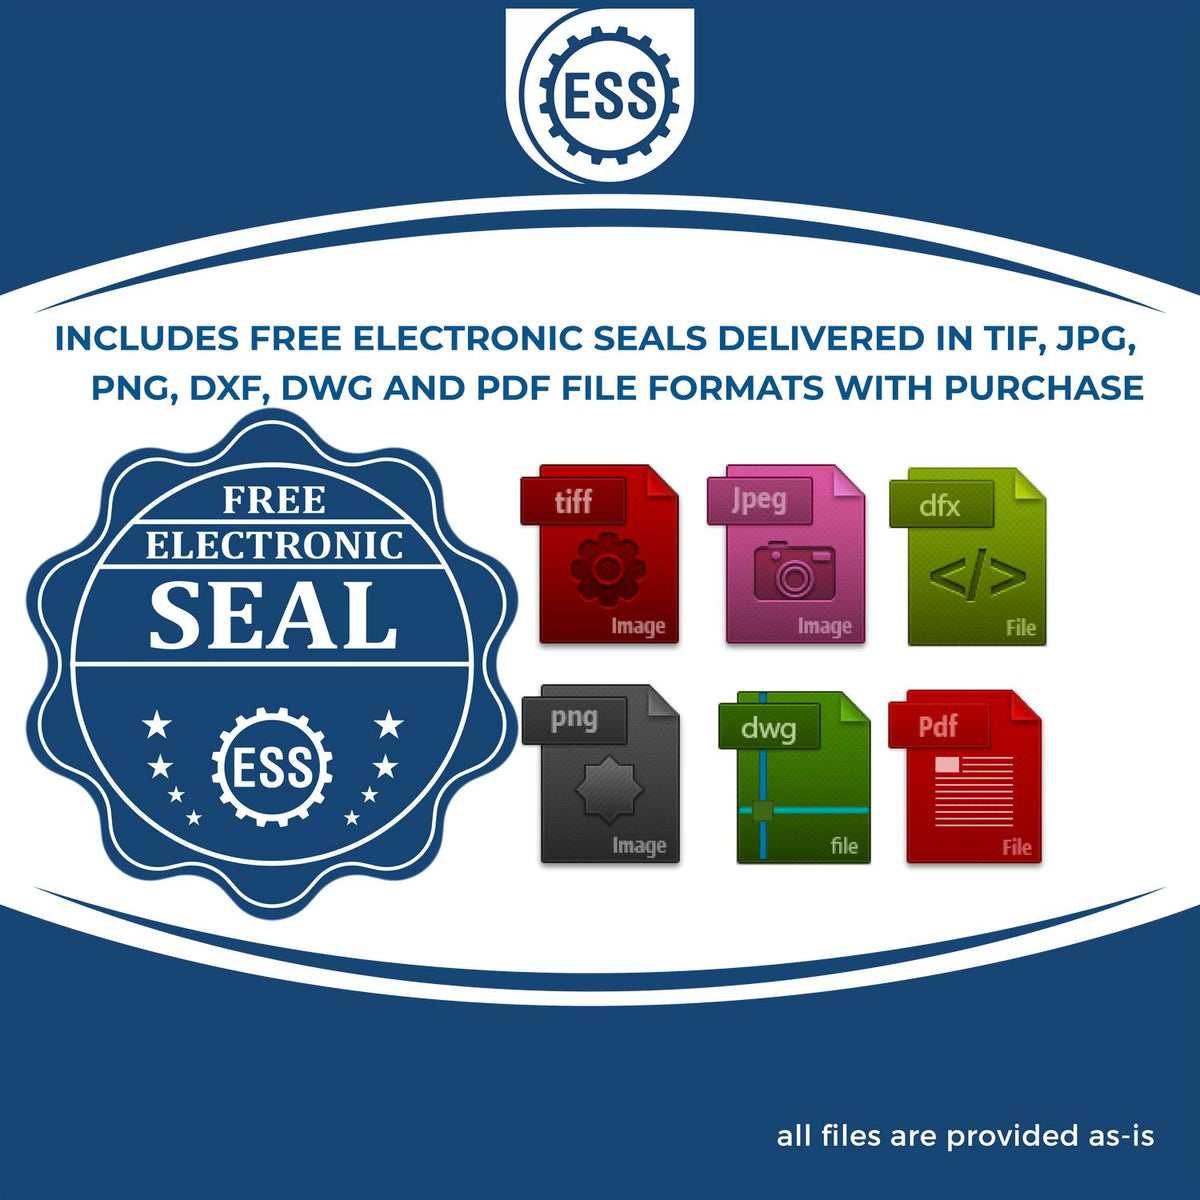 An infographic for the free electronic seal for the State of Arkansas Extended Long Reach Engineer Seal illustrating the different file type icons such as DXF, DWG, TIF, JPG and PNG.